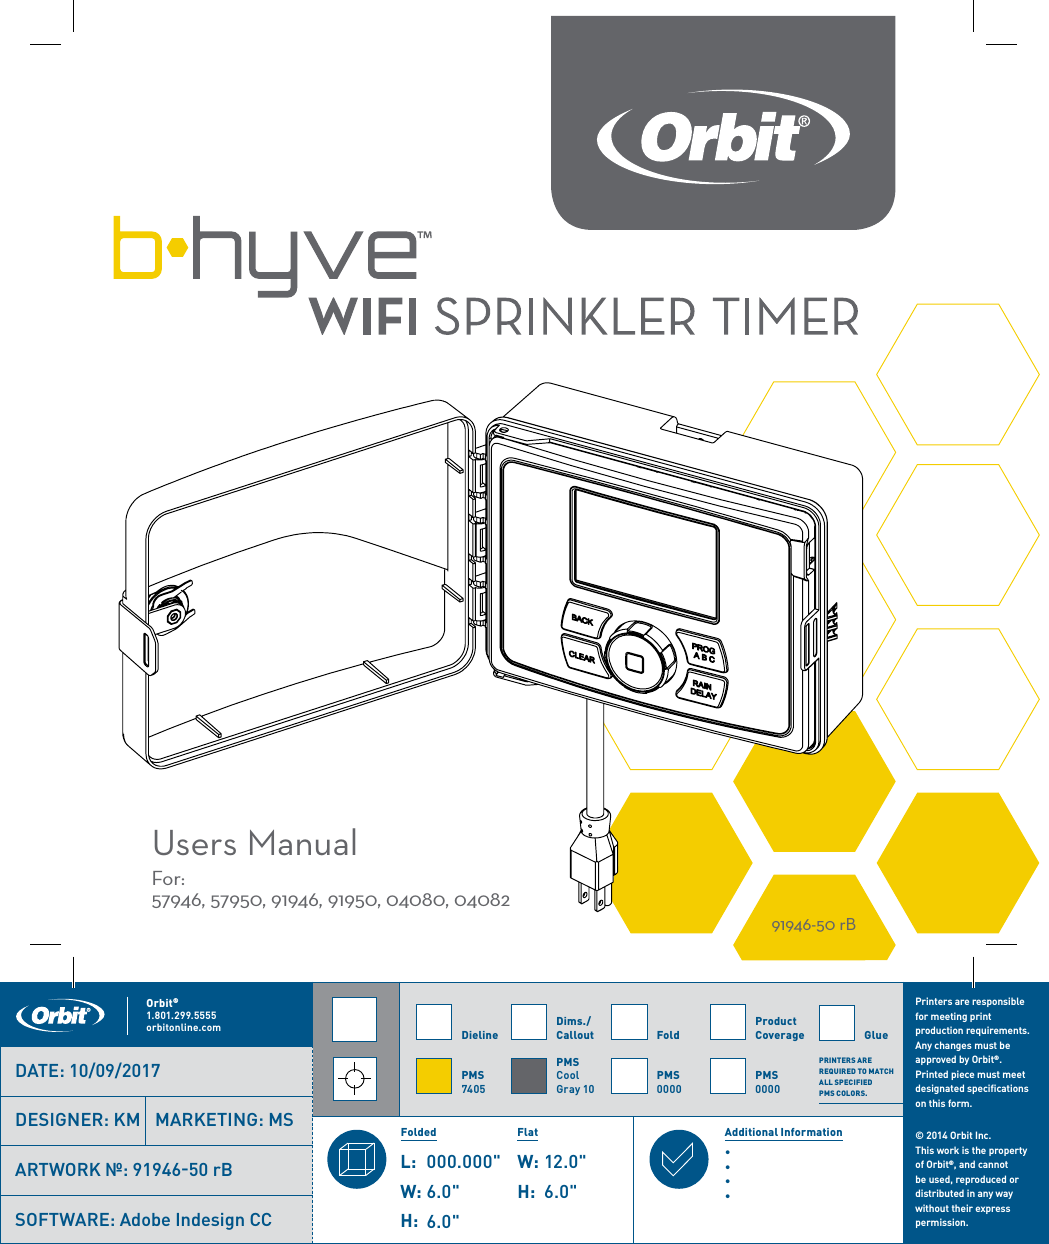 WIFI SPRINKLER TIMERUsers ManualFor: 57946, 57950, 91946, 91950, 04080, 0408291946-50 rBPrinters are responsible for meeting print production requirements. Any changes must be approved by Orbit®. Printed piece must meet designated specifications on this form.© 2014 Orbit Inc.  This work is the property of Orbit®, and cannot be used, reproduced or distributed in any way without their express permission.DielinePMS7405FoldPMS0000Product CoveragePMS0000Dims./ CalloutPMSCool Gray 10∙∙∙∙ Orbit®1.801.299.5555orbitonline.com GlueFolded Flat Additional InformationPRINTERS ARE REQUIRED TO MATCH ALL SPECIFIED  PMS COLORS.DATE: 10/09/2017DESIGNER: KM MARKETING: MSSOFTWARE: Adobe Indesign CCARTWORK №: 91946-50 rB L:W:H:000.000&quot; W:H:6.0&quot;6.0&quot;12.0&quot;6.0&quot;